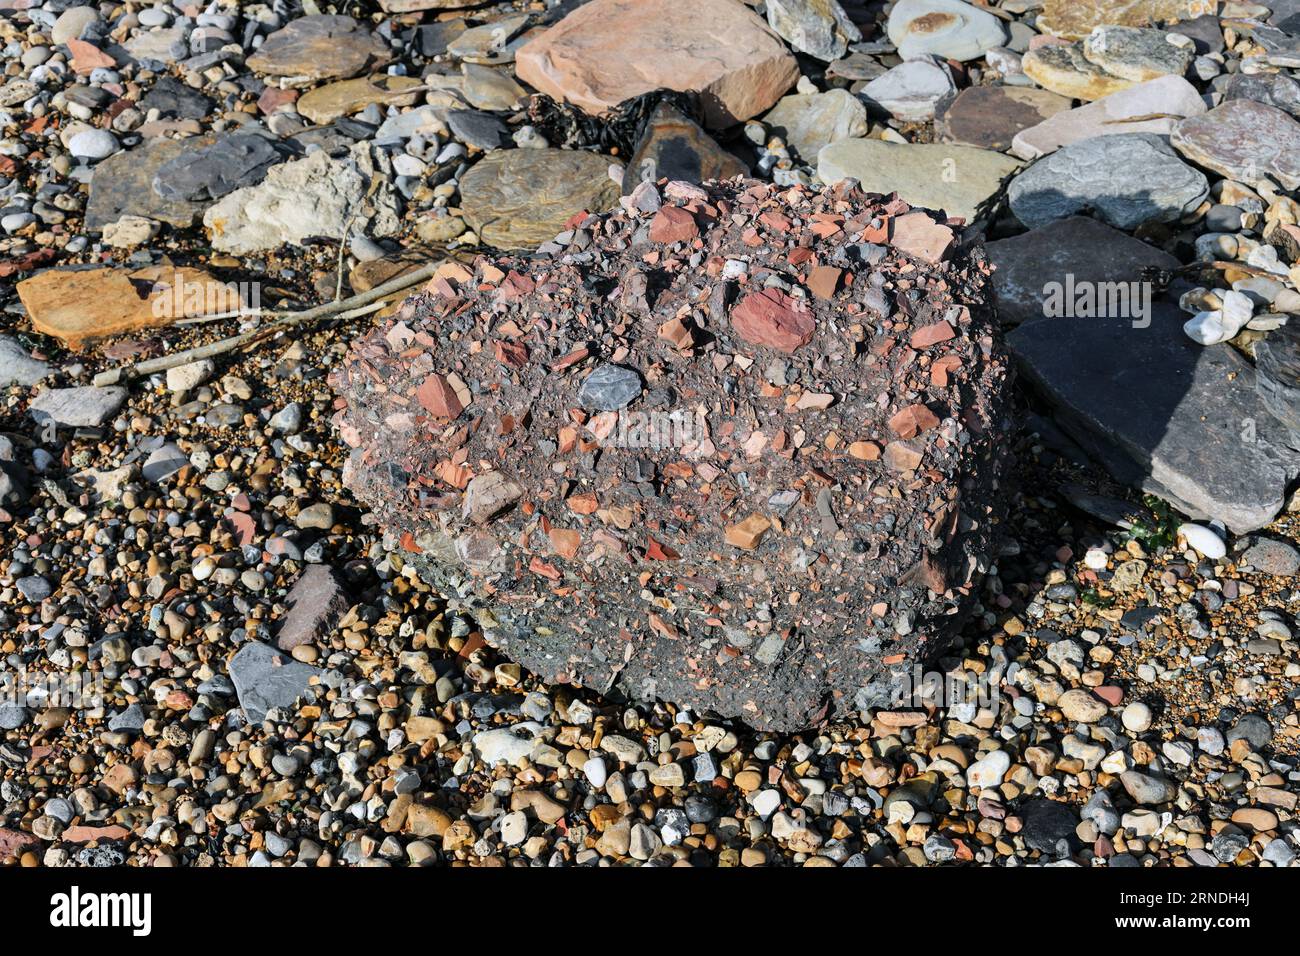 Industrial Waste from Blast Furnaces and Coal Mines that is slowly being eroded and washed away by the sea on the Blast Beach, Durham Heritage Coast, Stock Photo